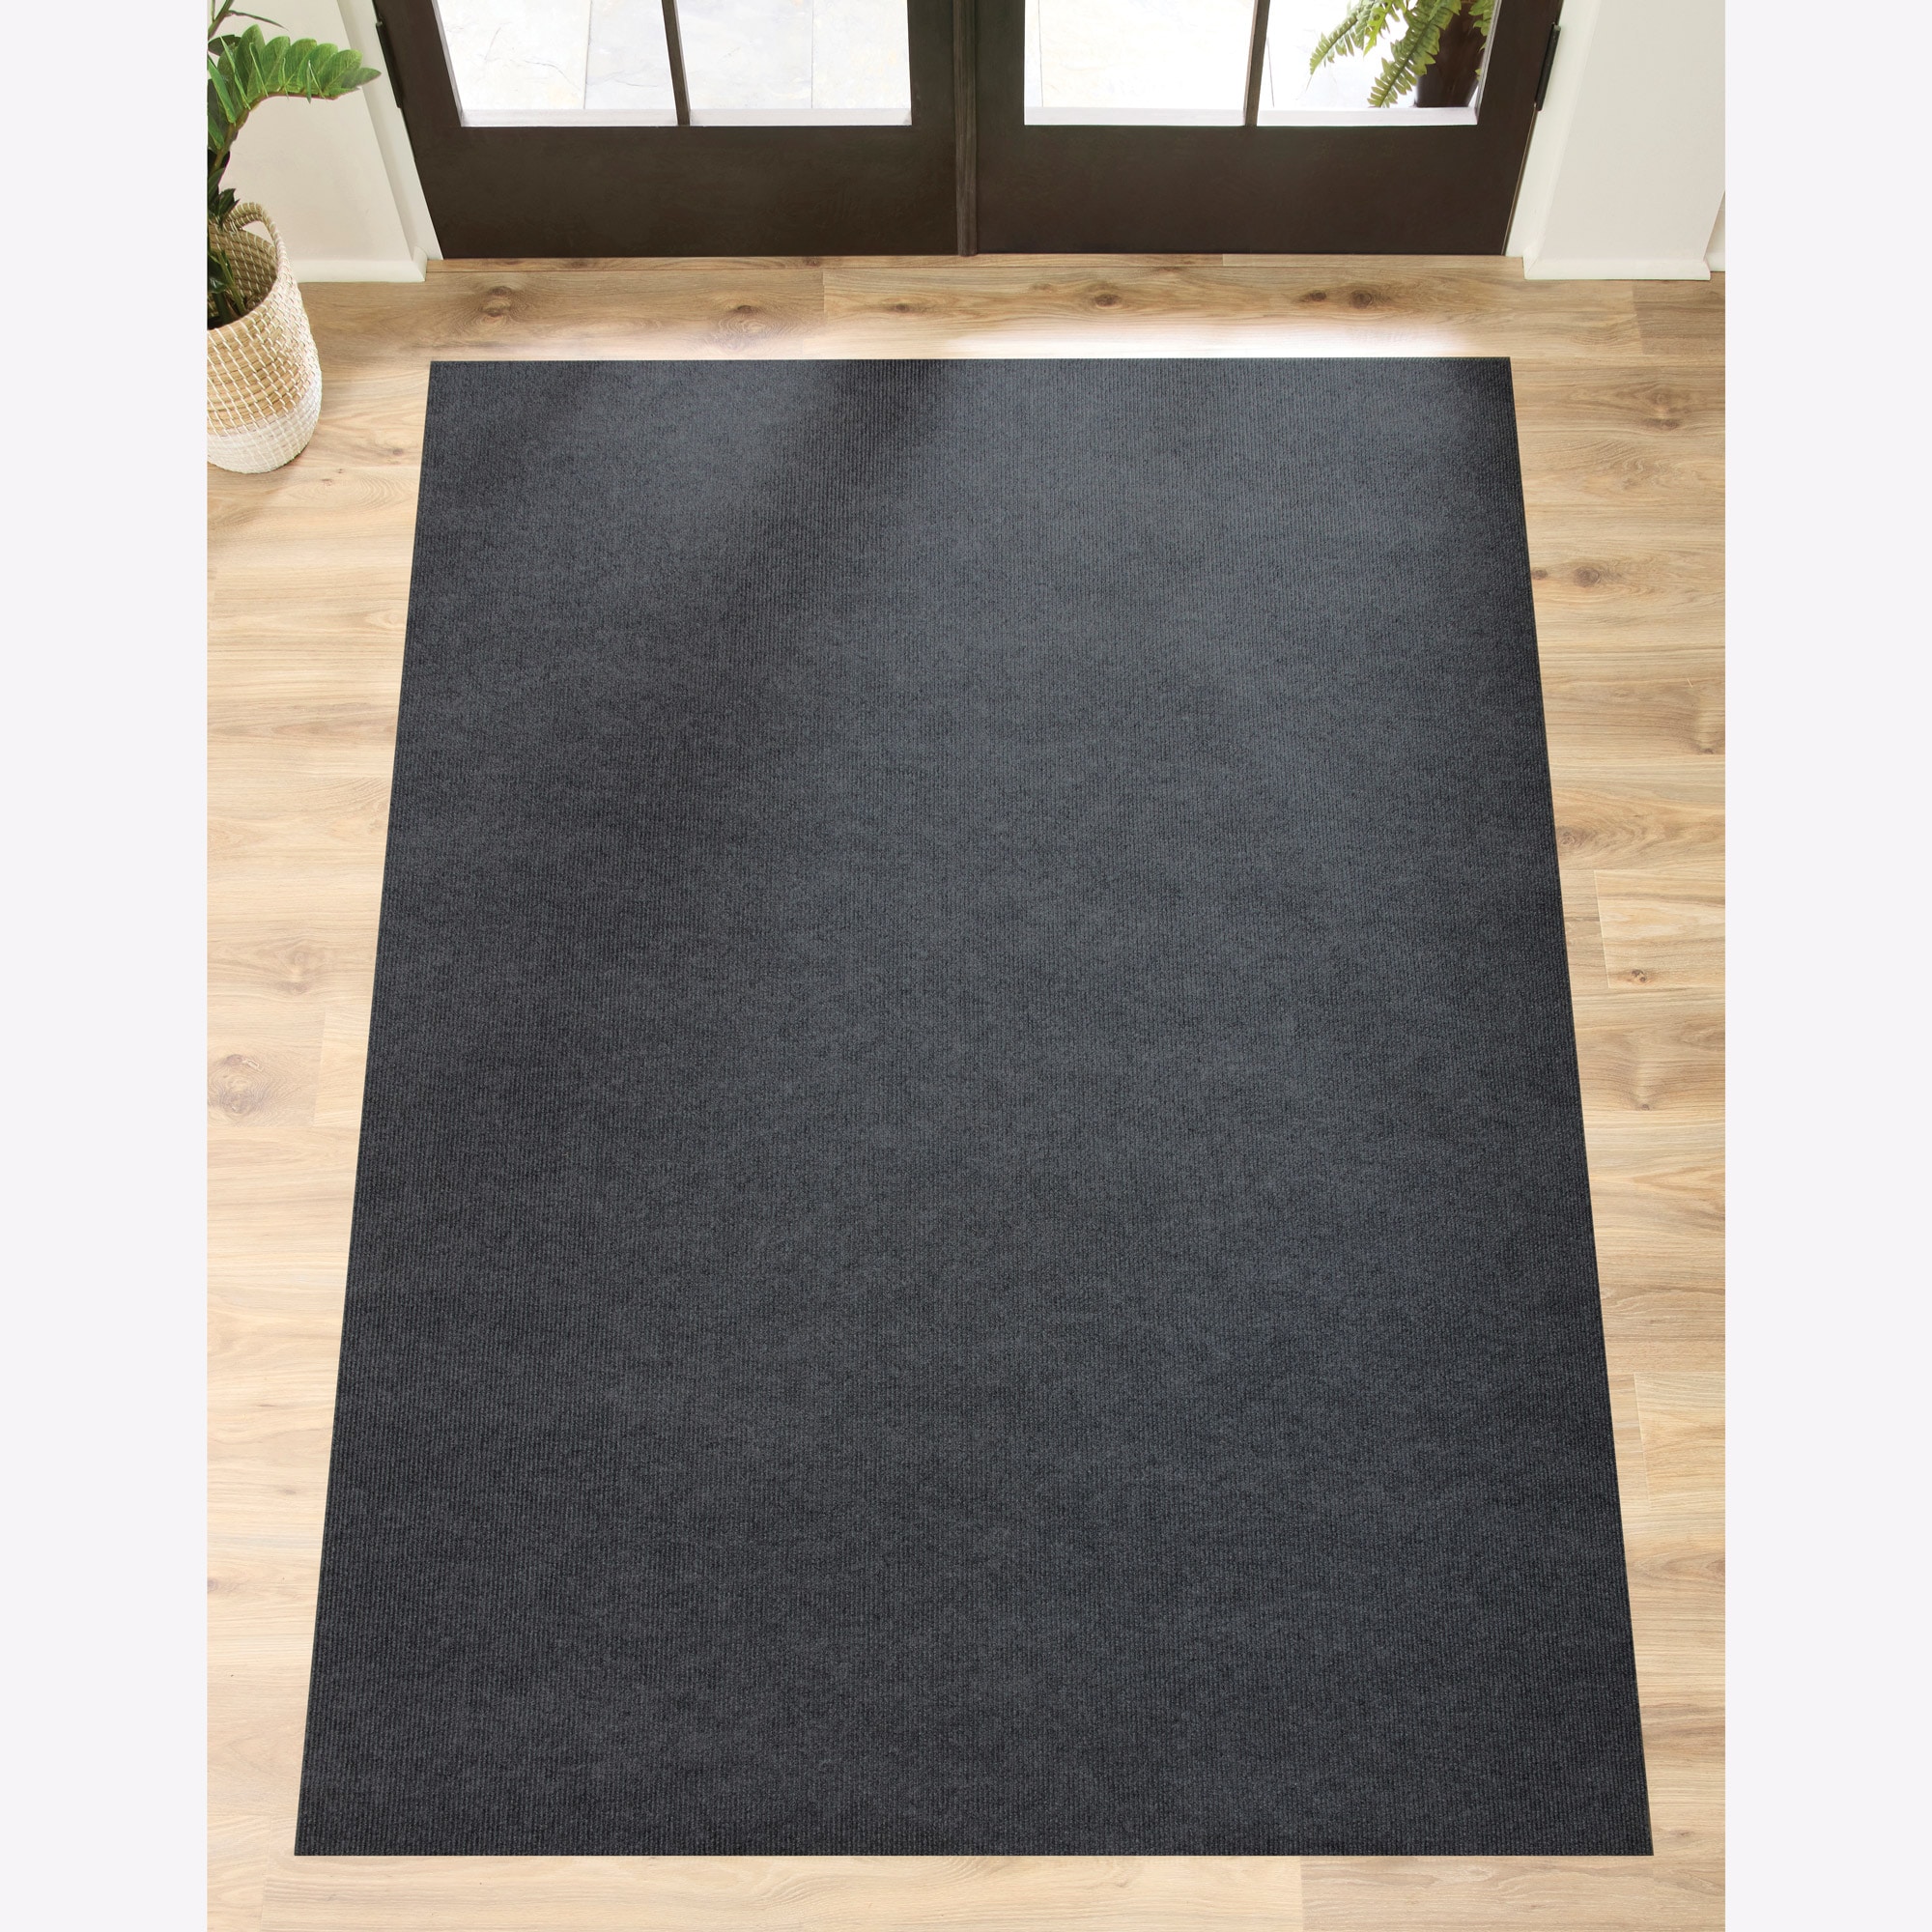 Mainstays Non-skid Rug Pad - 2 FT X 6 for sale online